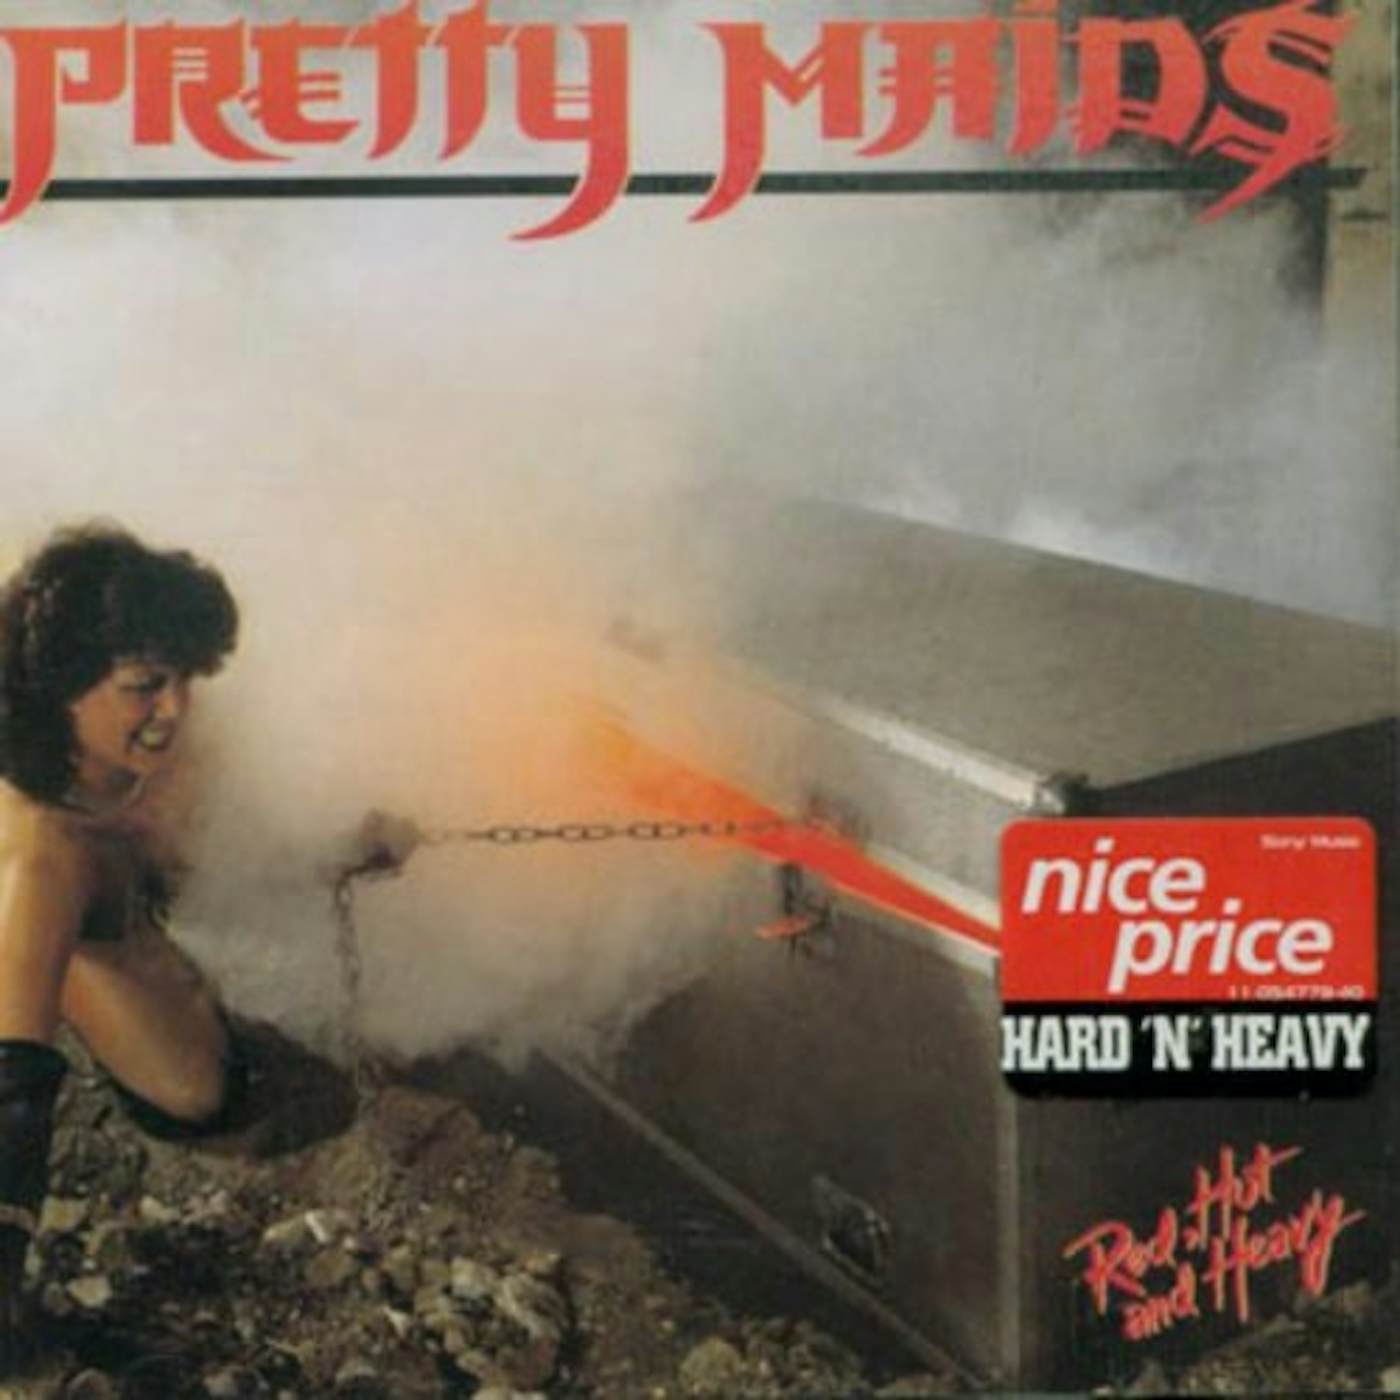 Pretty Maids RED HOT & HEAVY CD